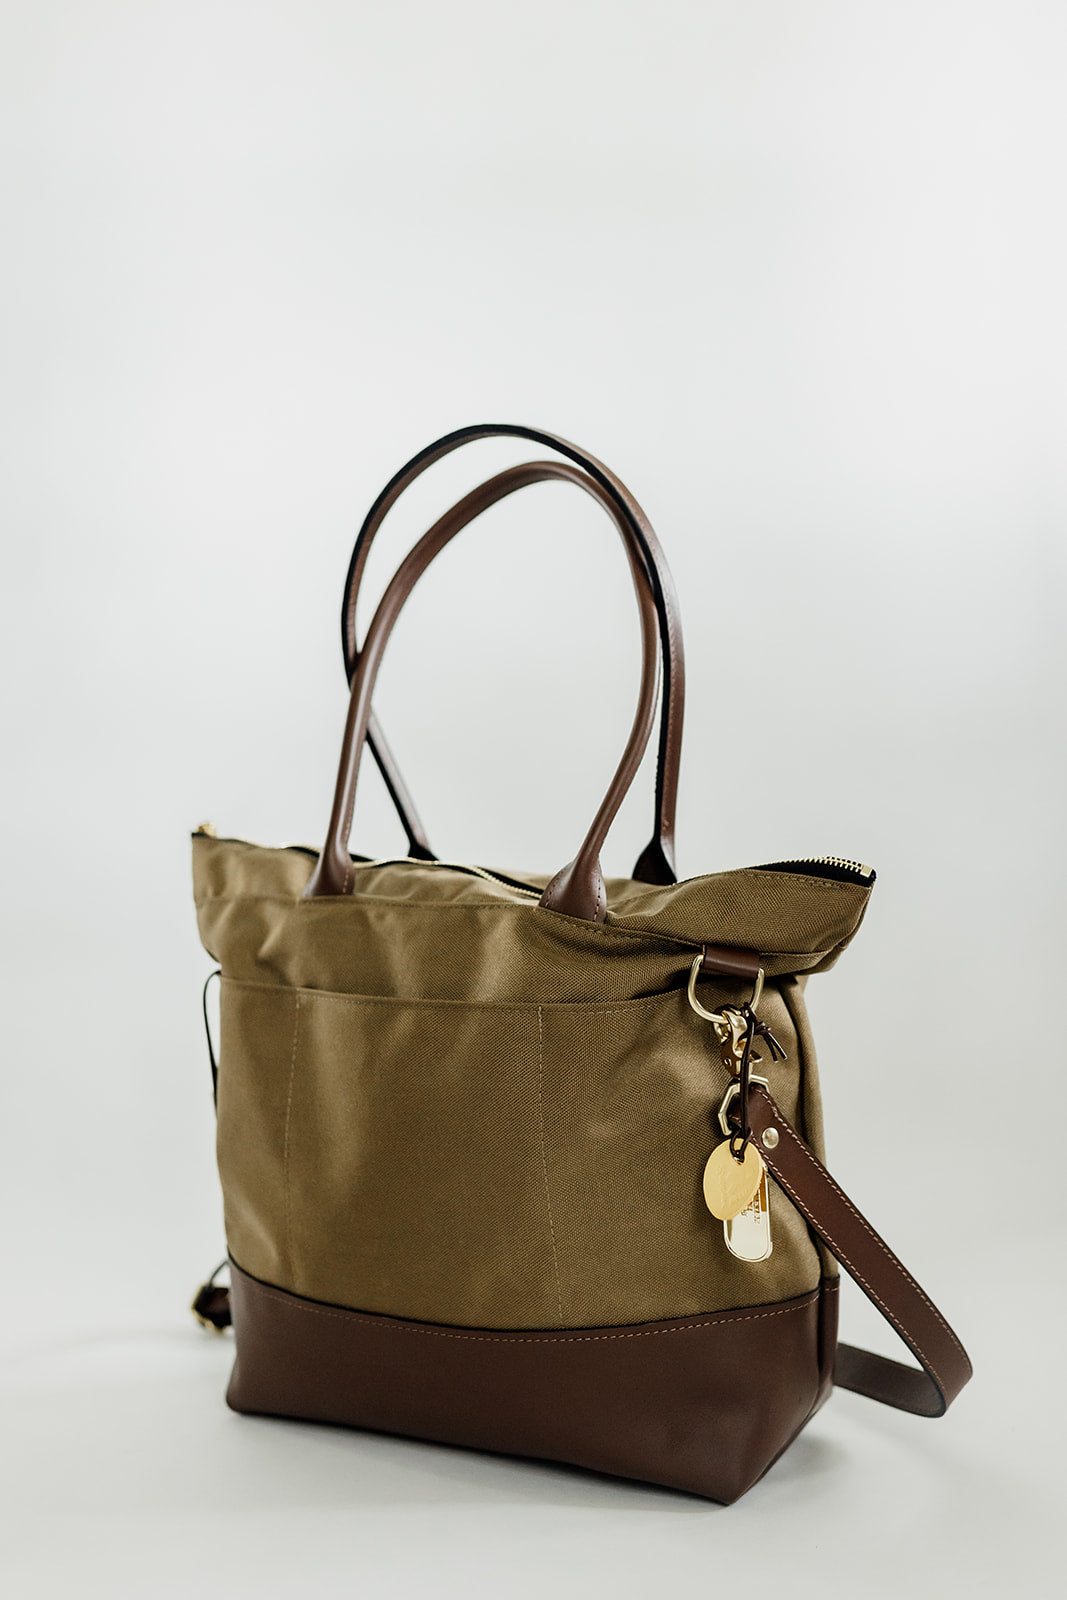 Williams | R. Riveter + U.S. ARMY Carry All Tote